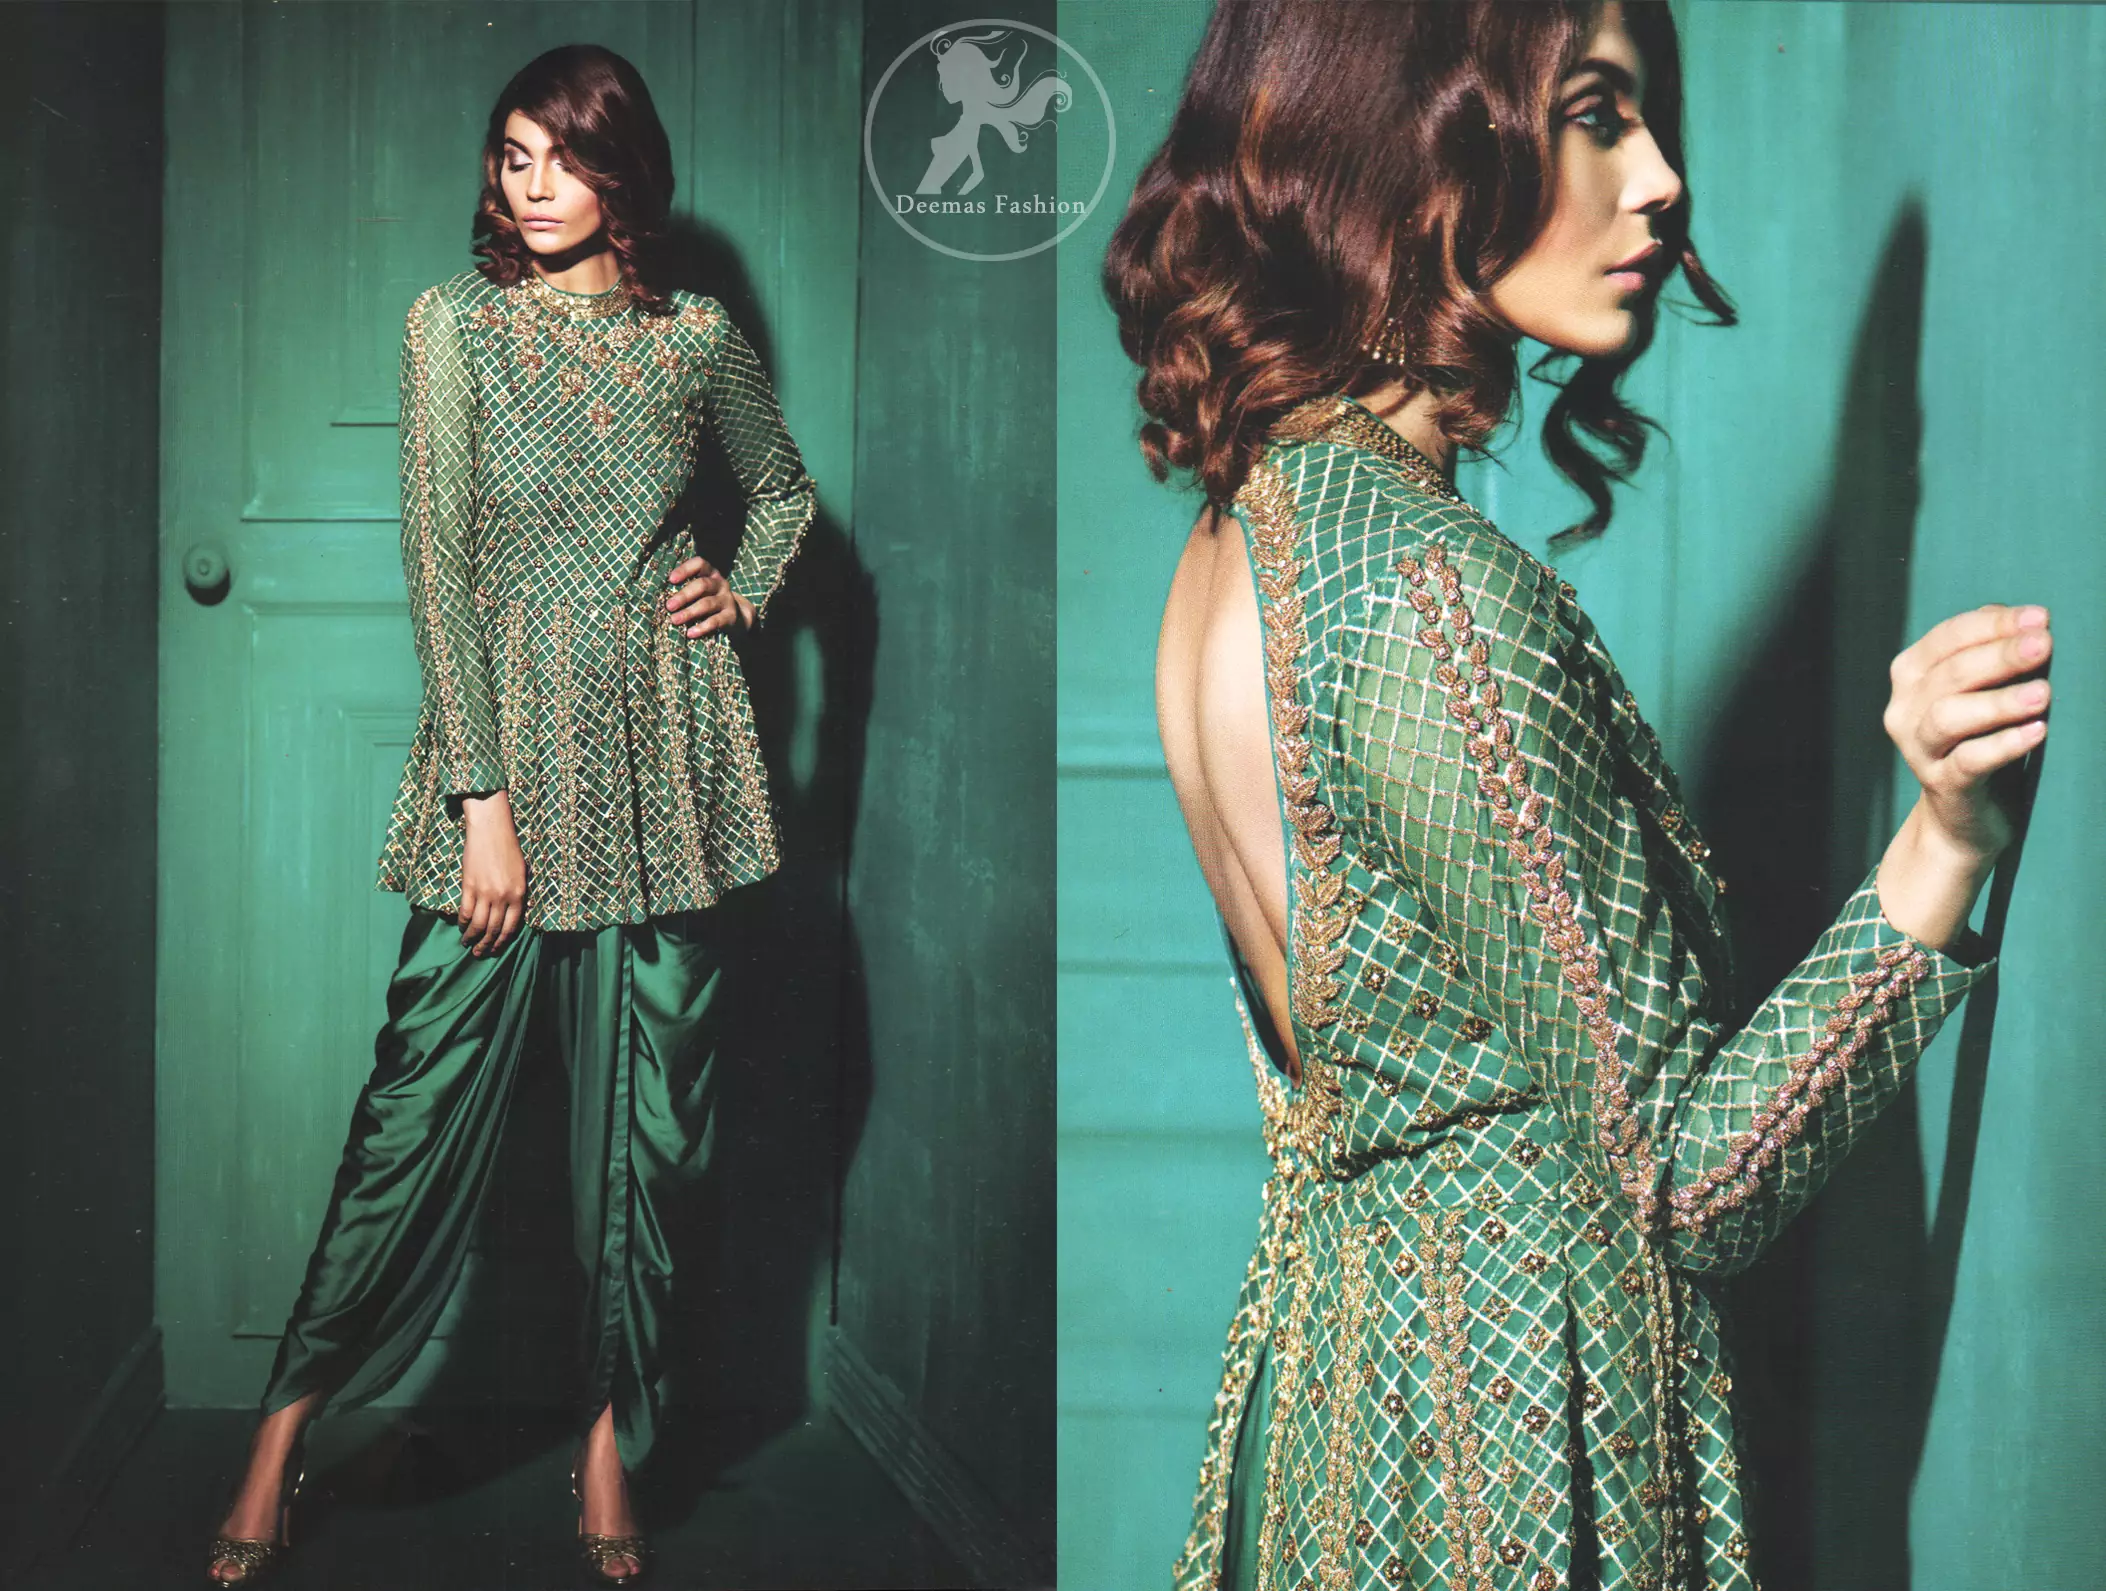 Party wear teal green peplum made with organza. Peplum having beautiful gold and antique hand embellishment. Peplum comes silky tulip and net dupatta.